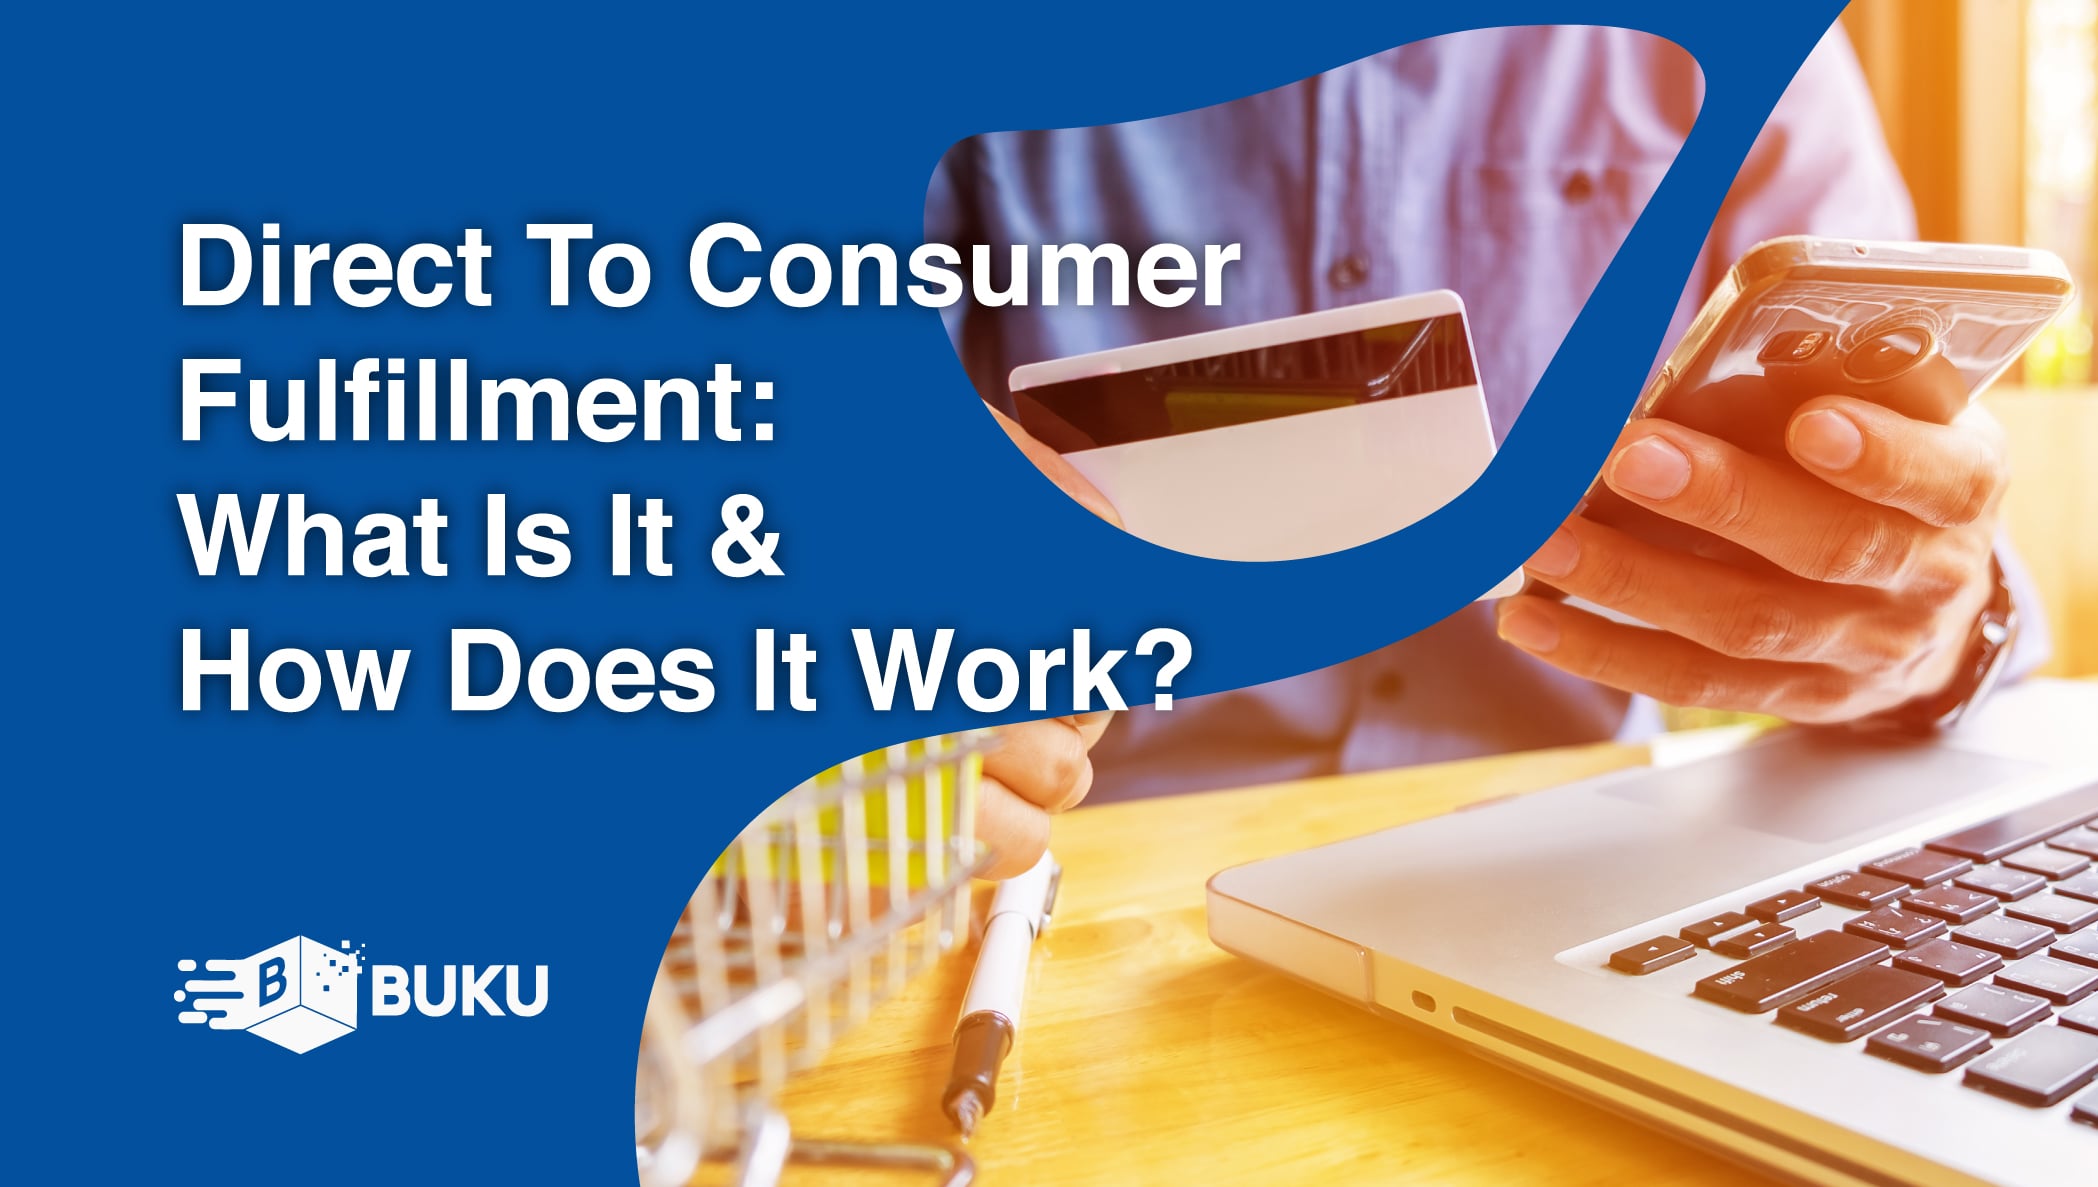 Direct To Consumer (DTC) Fulfillment: What Is It & How Does It Work?